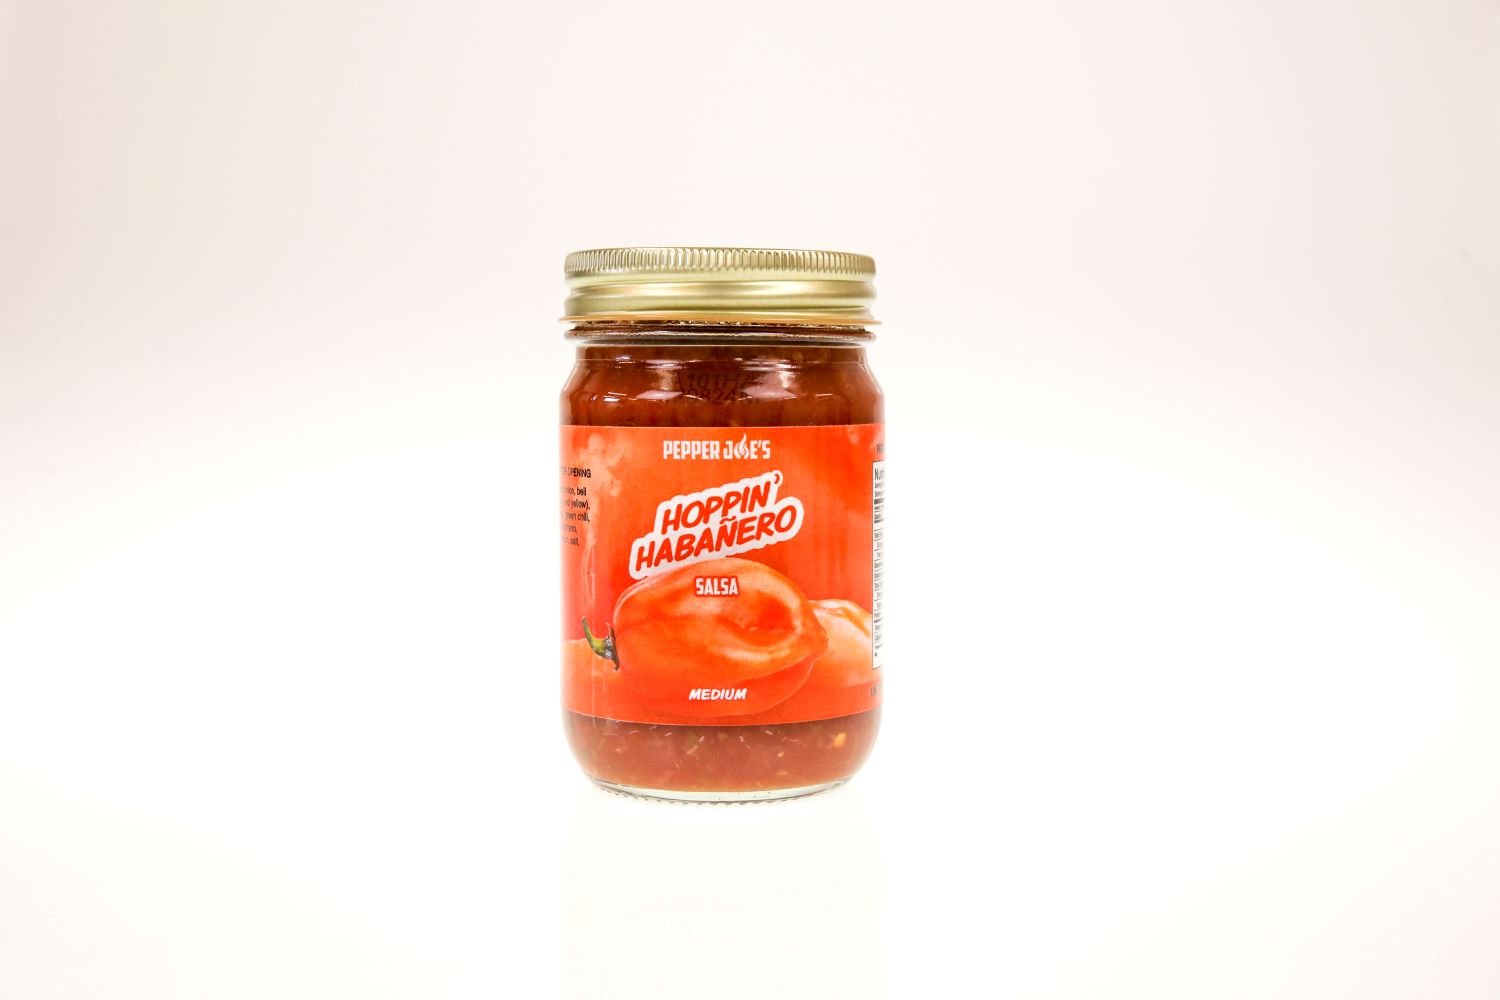 Pepper Joe's Sweet and Spicy Salsa 5-Pack - salsa collection - hoppin habanero salsa jar on white background